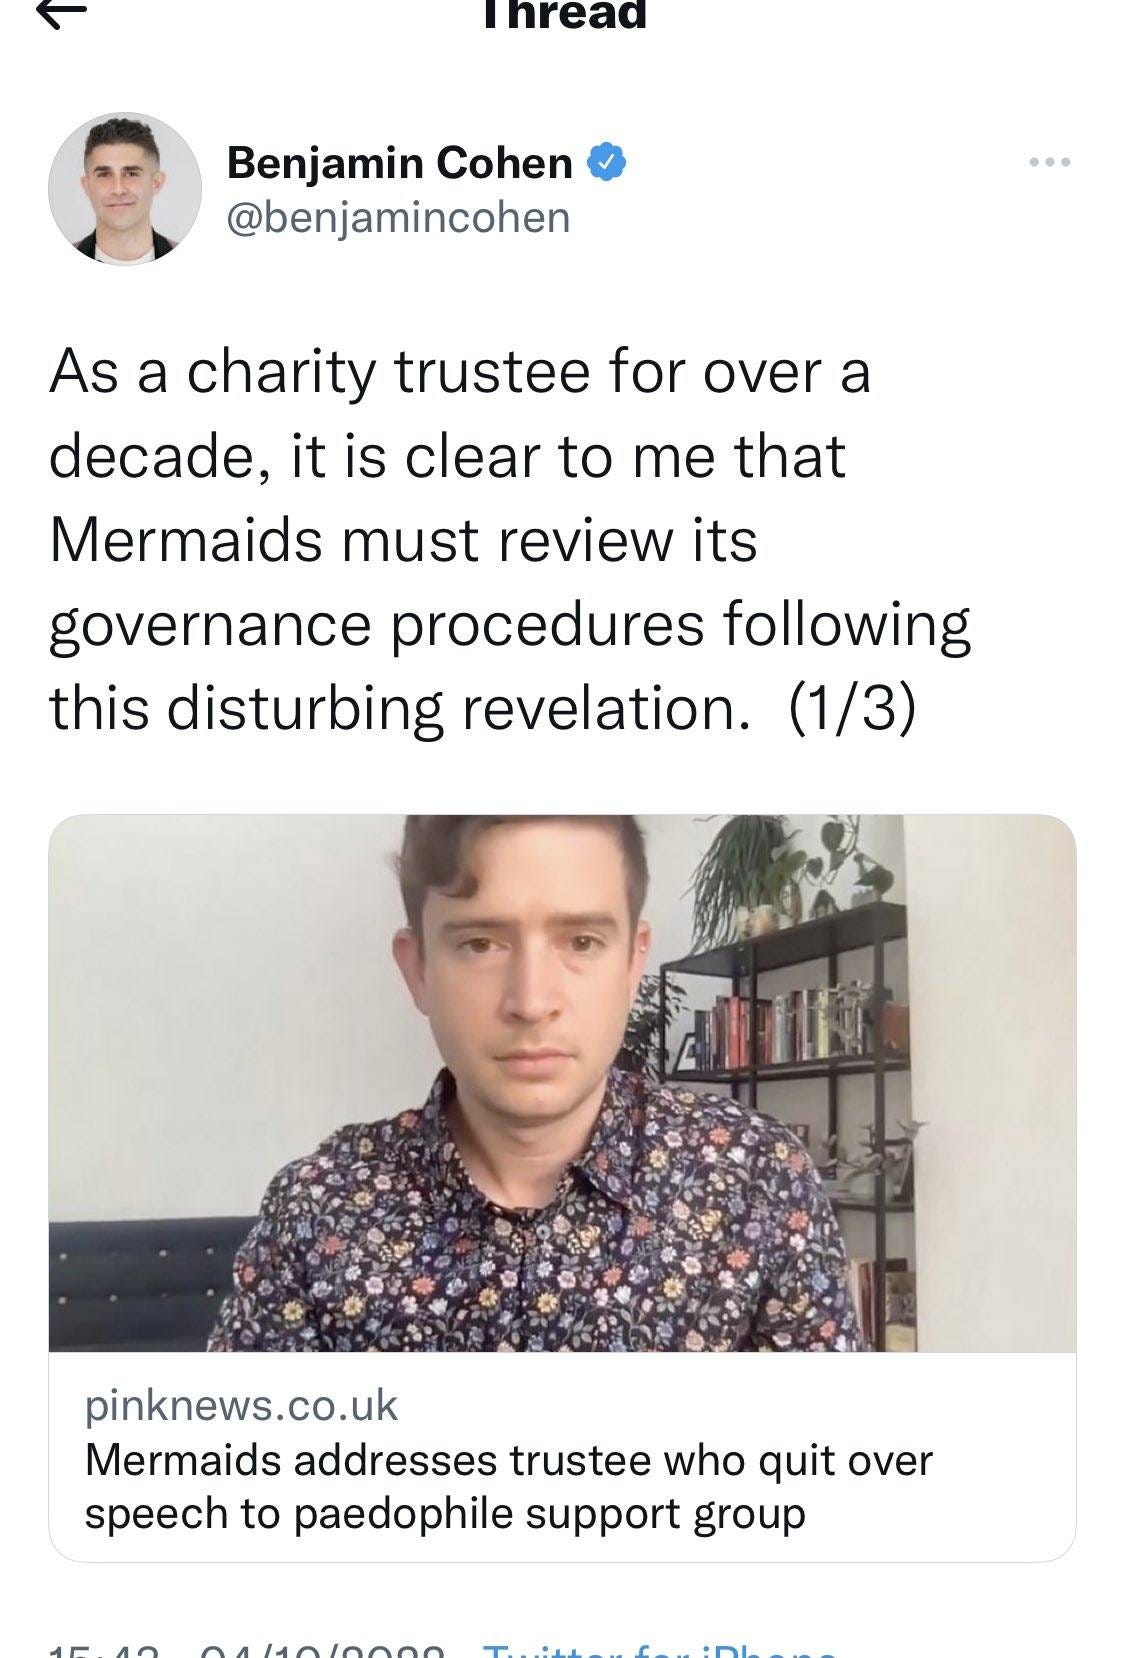 May be an image of 2 people and text that says 'Ihread Benjamin Cohen @benjamincohen As a charity trustee for over a decade, it is clear to me that Mermaids must review its governance procedures following this disturbing revelation. (1/3) pinknews.co.ul Mermaids addresses trustee who quit over speech to paedophile support group'